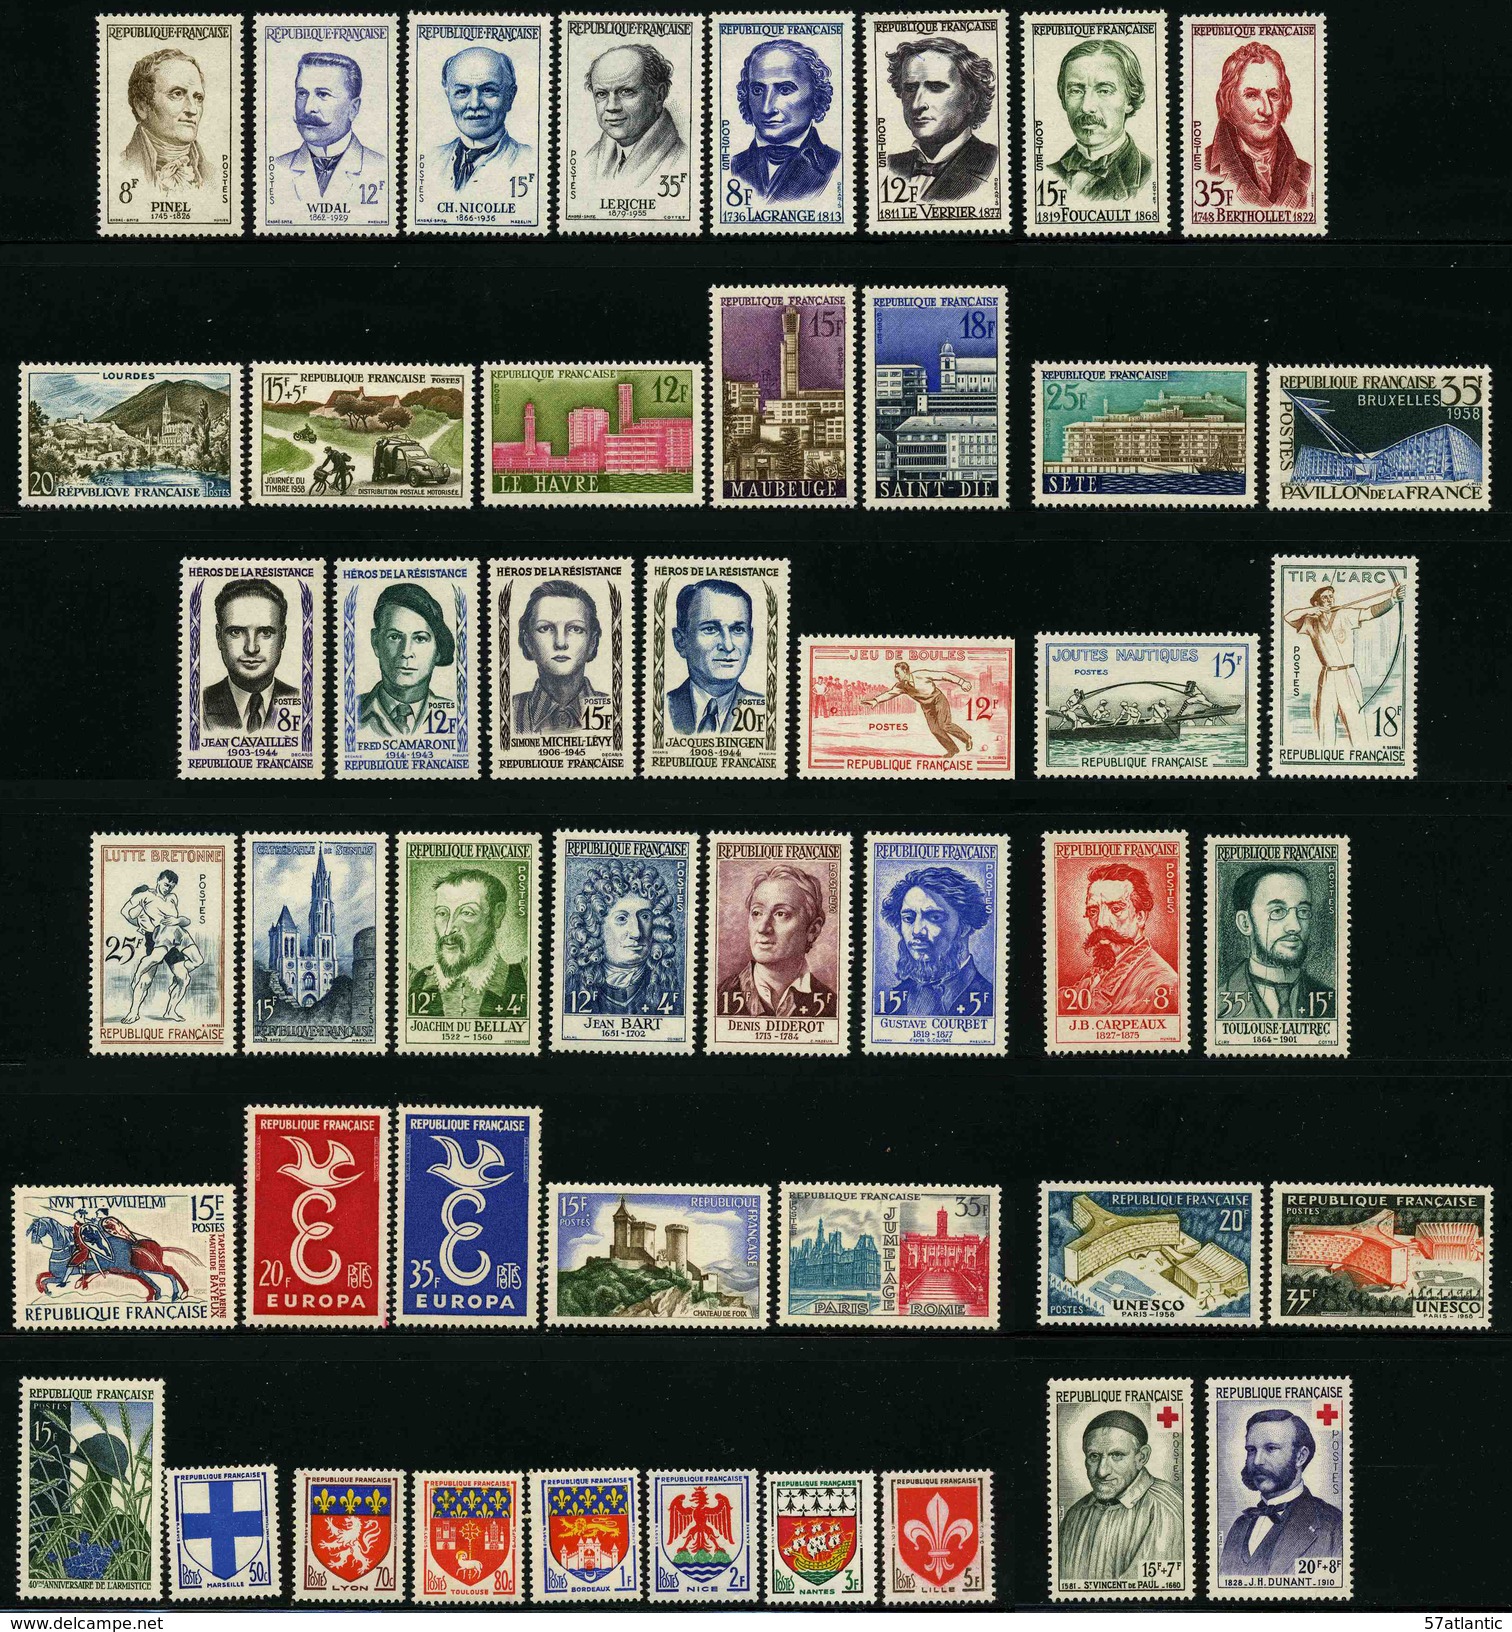 FRANCE - ANNEE COMPLETE 1958 - YT 1142 à 1188 ** - 47 TIMBRES NEUFS ** - 1950-1959